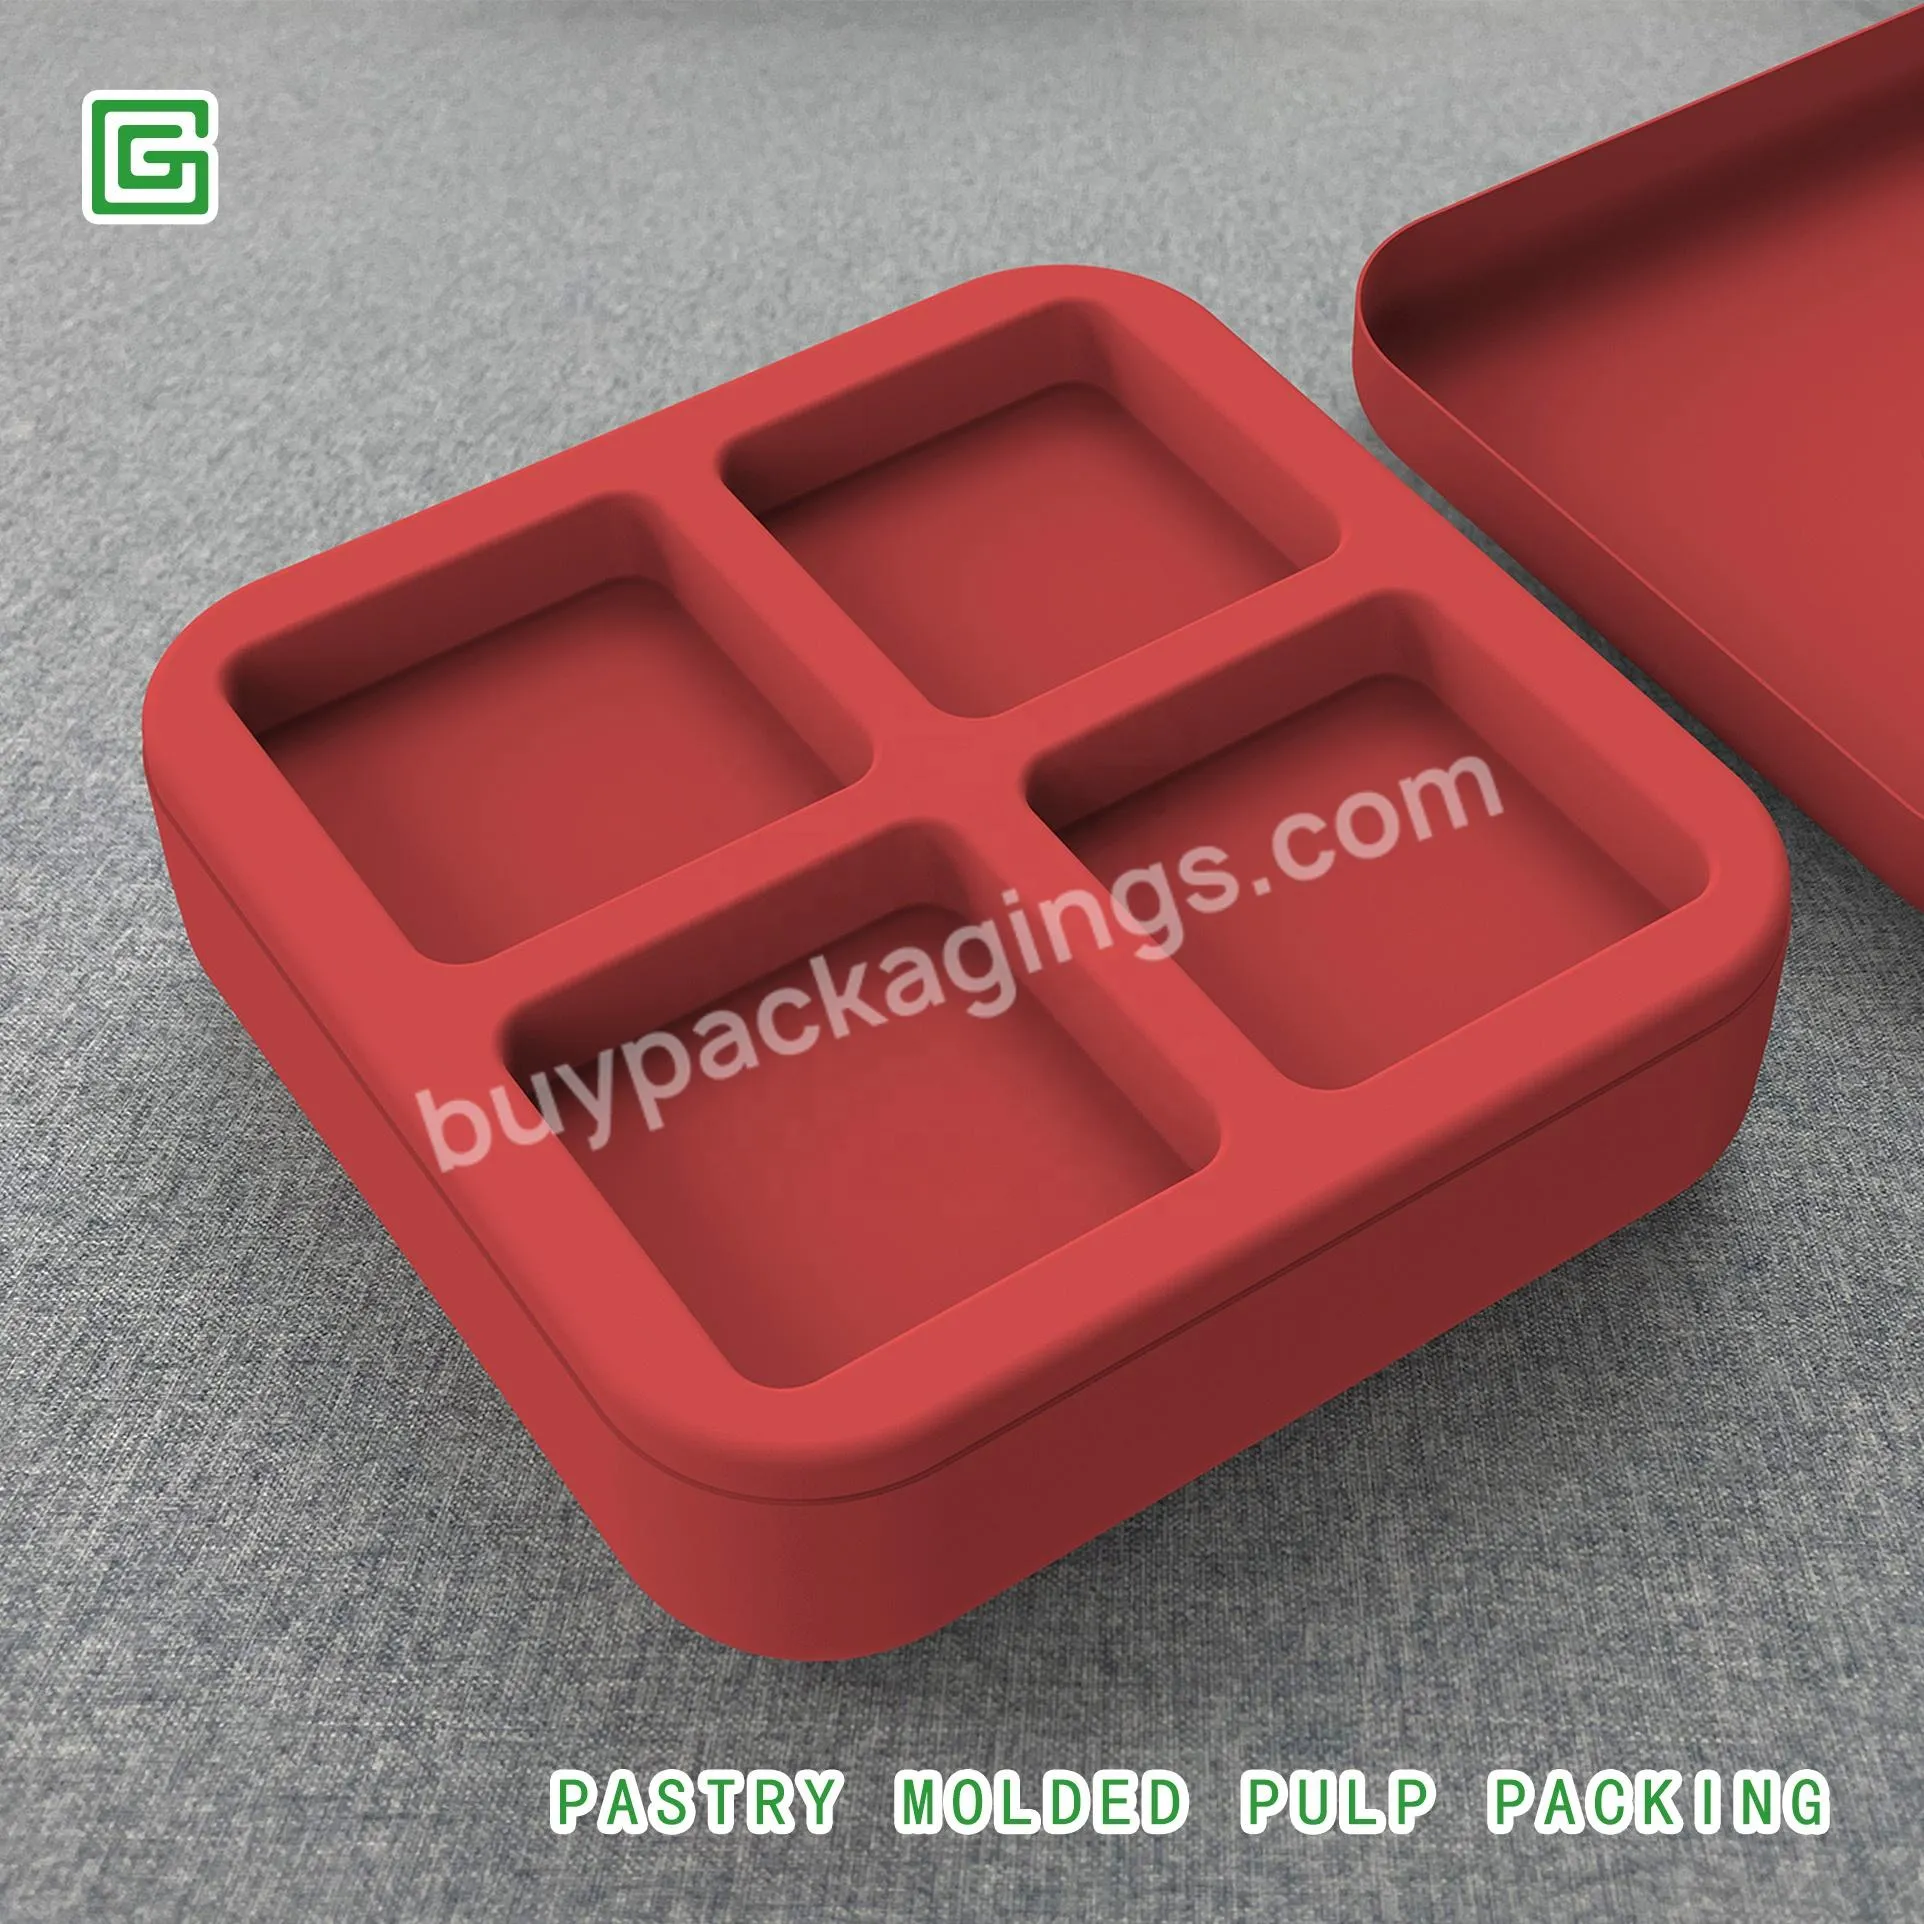 Large Capacity High Quality Custom Paper Boxes Molded Pulp Pastry Packaging - Buy Pulp Mold Box Packaging,Paper Pulp Molded Packaging,Pulp Packaging Mold.